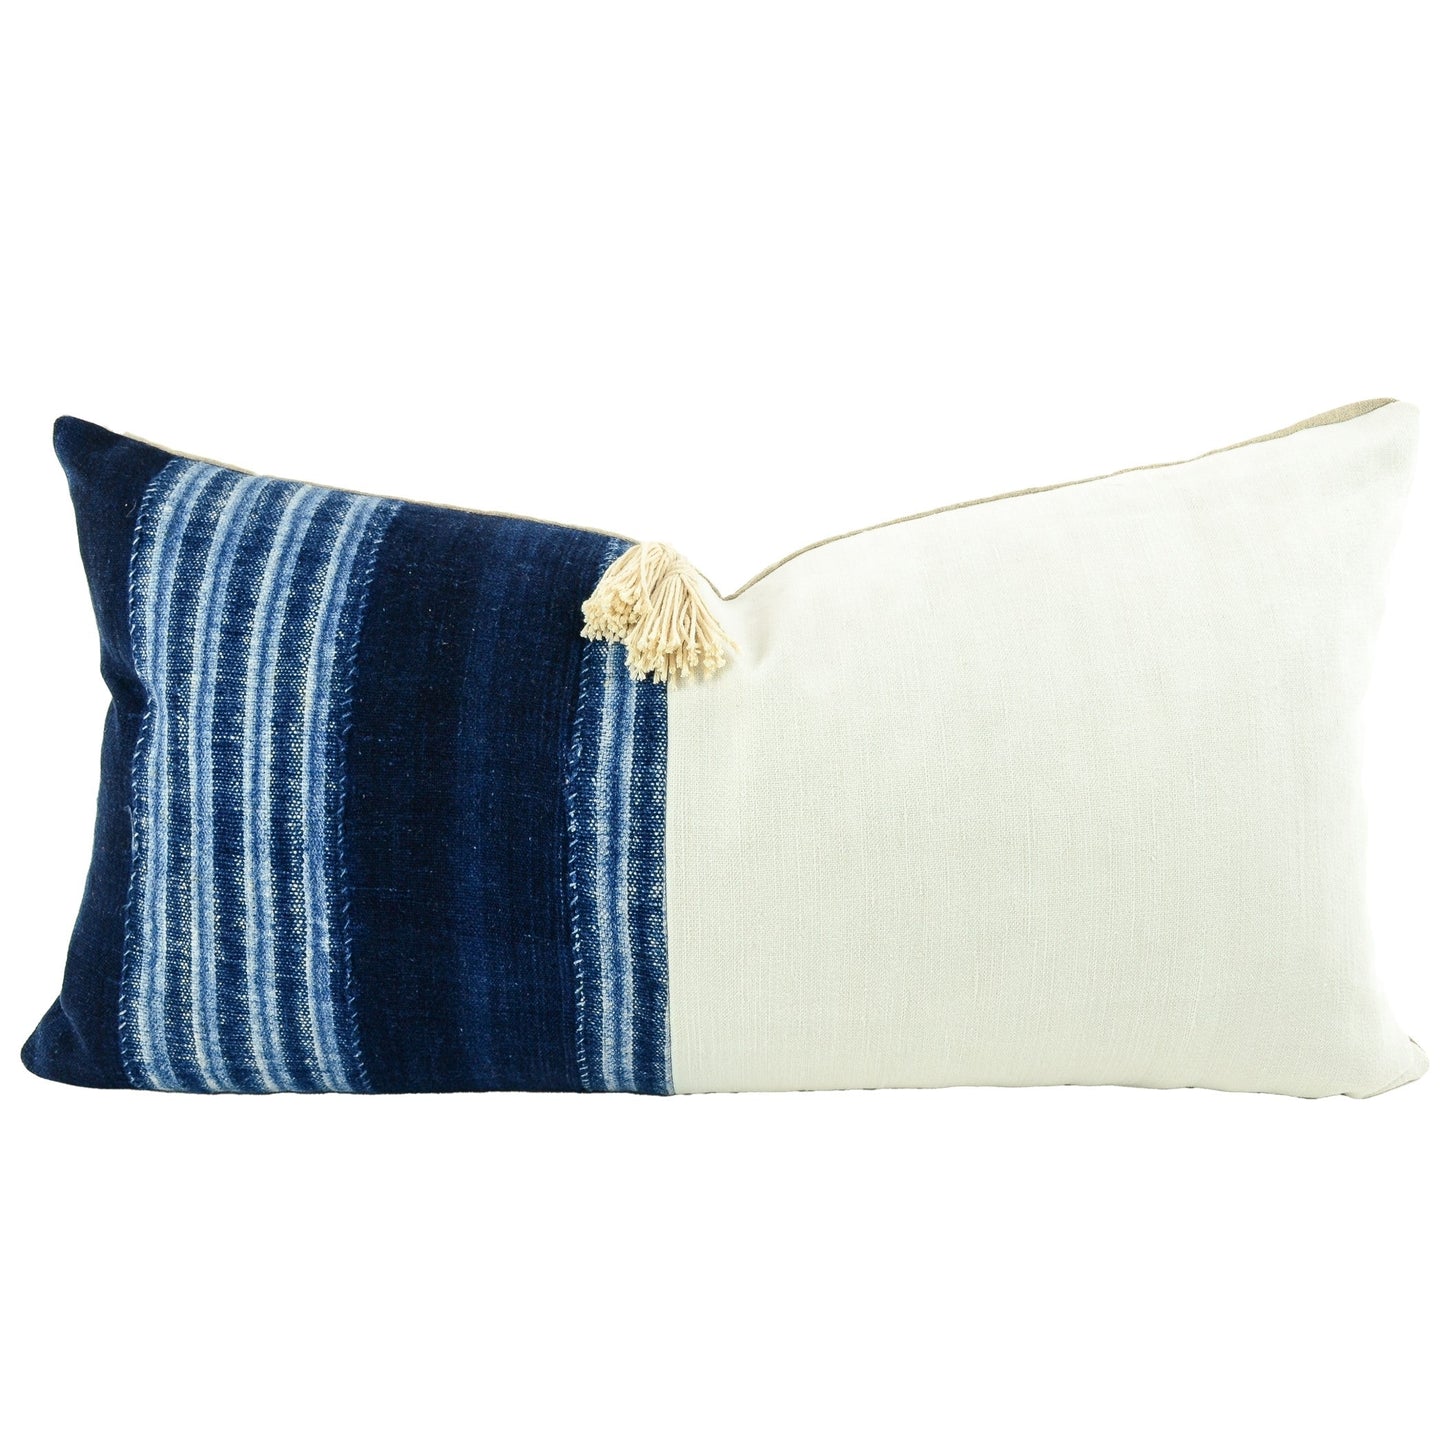 Front of pillow with rich blue and white patterns made from a traditional handwoven indigo cloth from Mali West Africa, vintage white European linen and an off-white tassle in the upper middle of the pillow